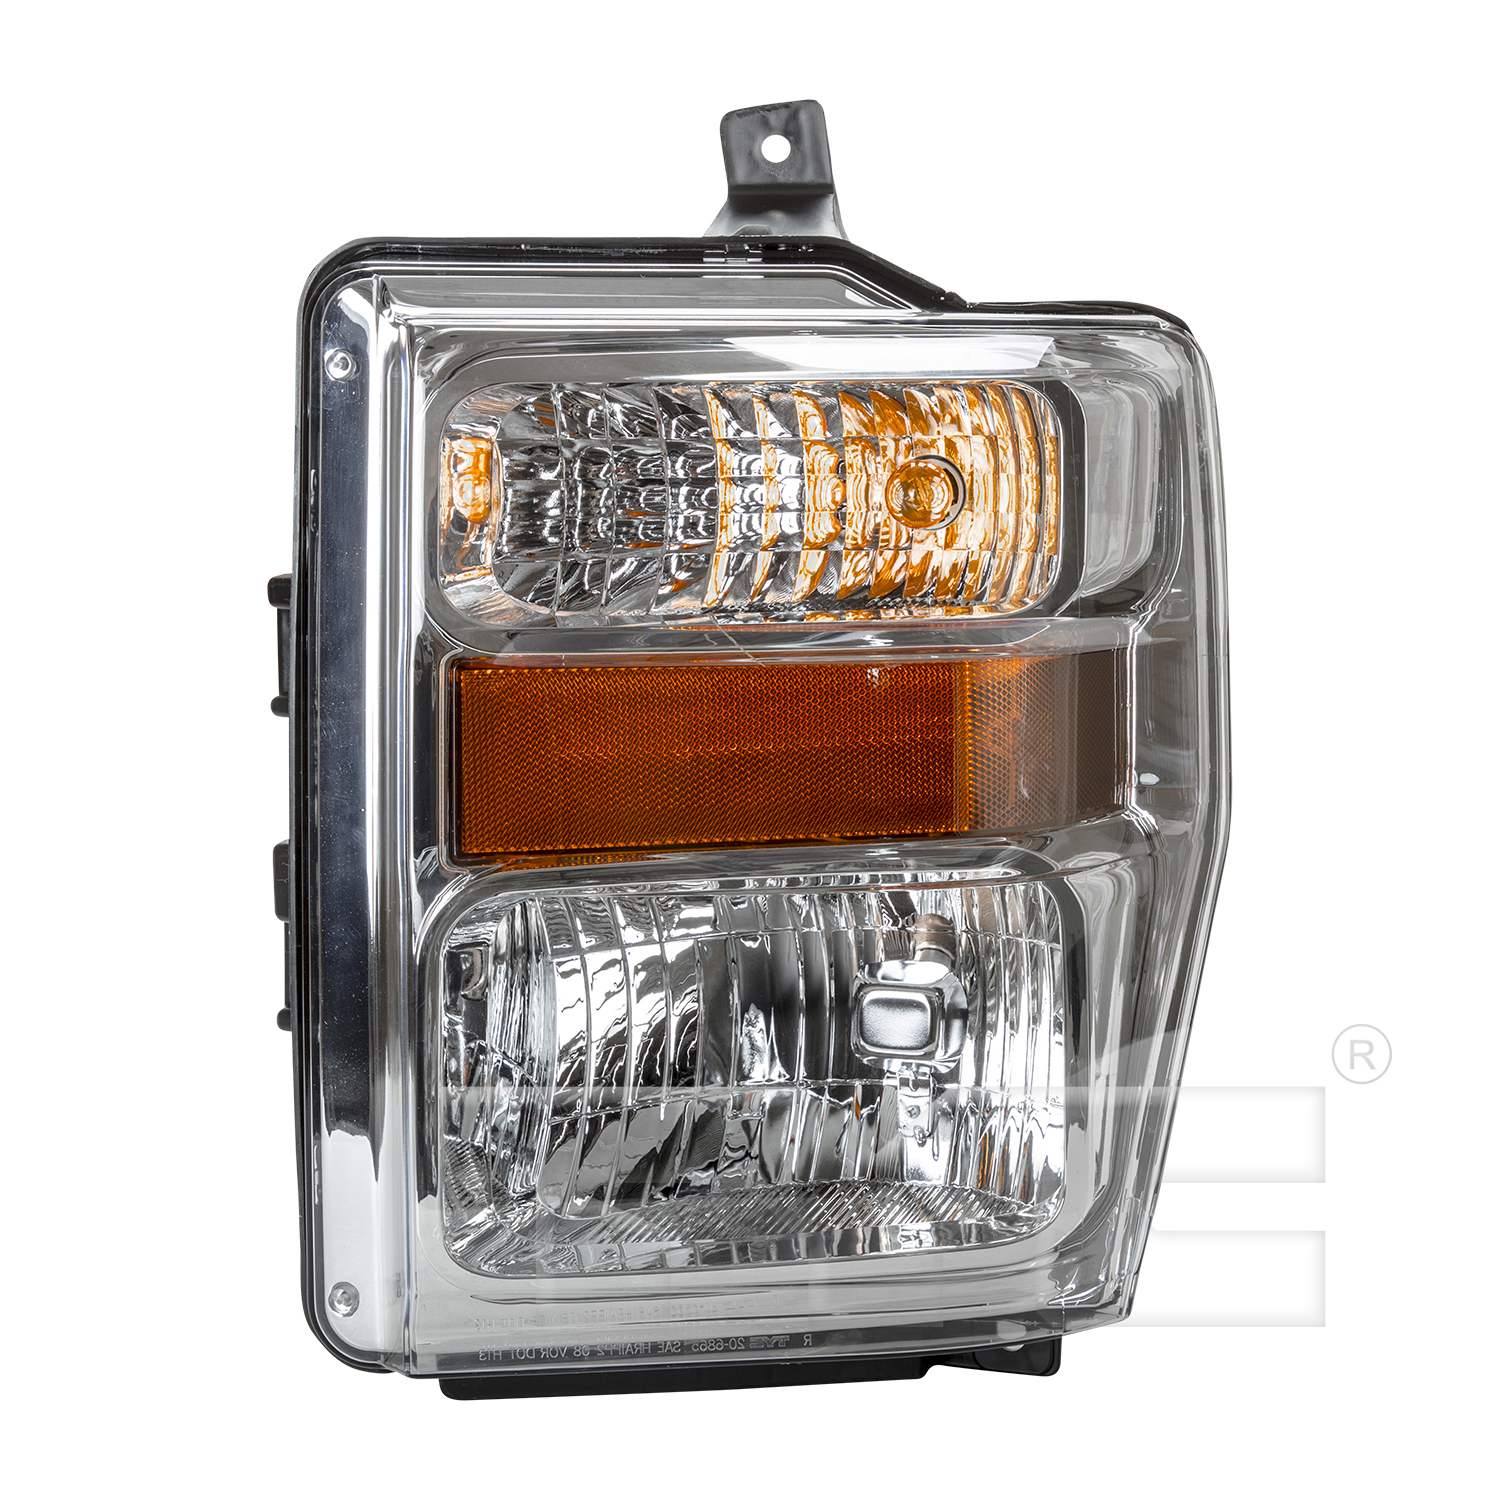 Aftermarket HEADLIGHTS for FORD - F-250 SUPER DUTY, F-250 SUPER DUTY,08-10,LT Headlamp assy composite